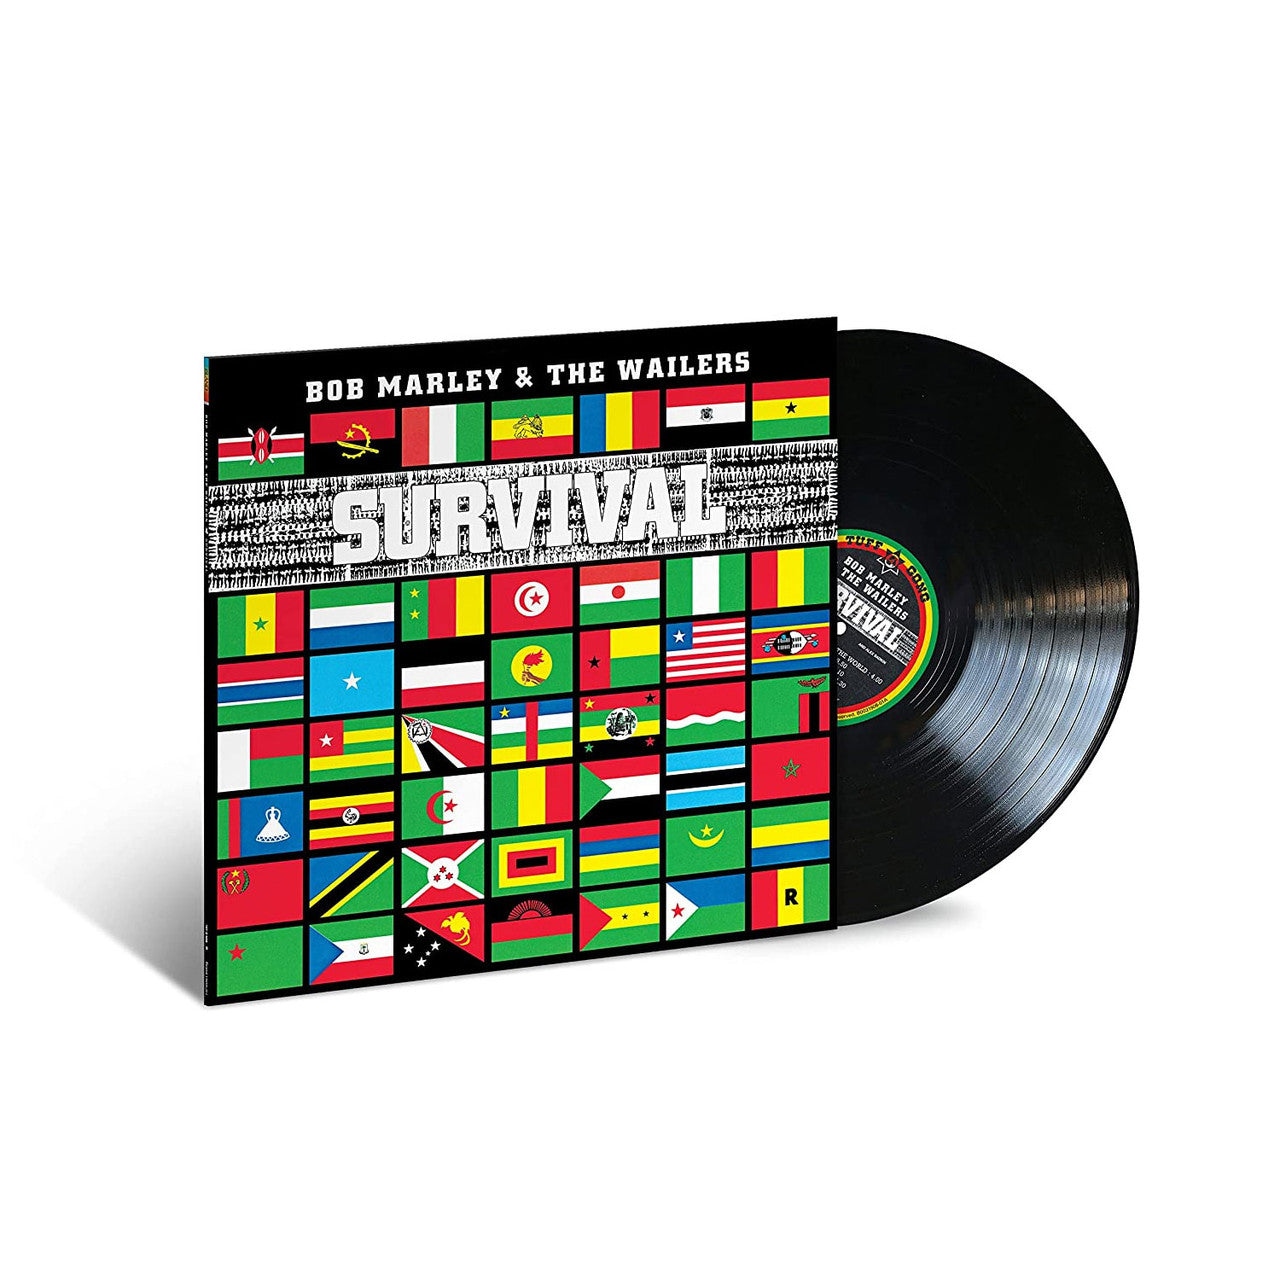 Bob Marley & The Wailers - Survival (Jamaican reissue numbered)